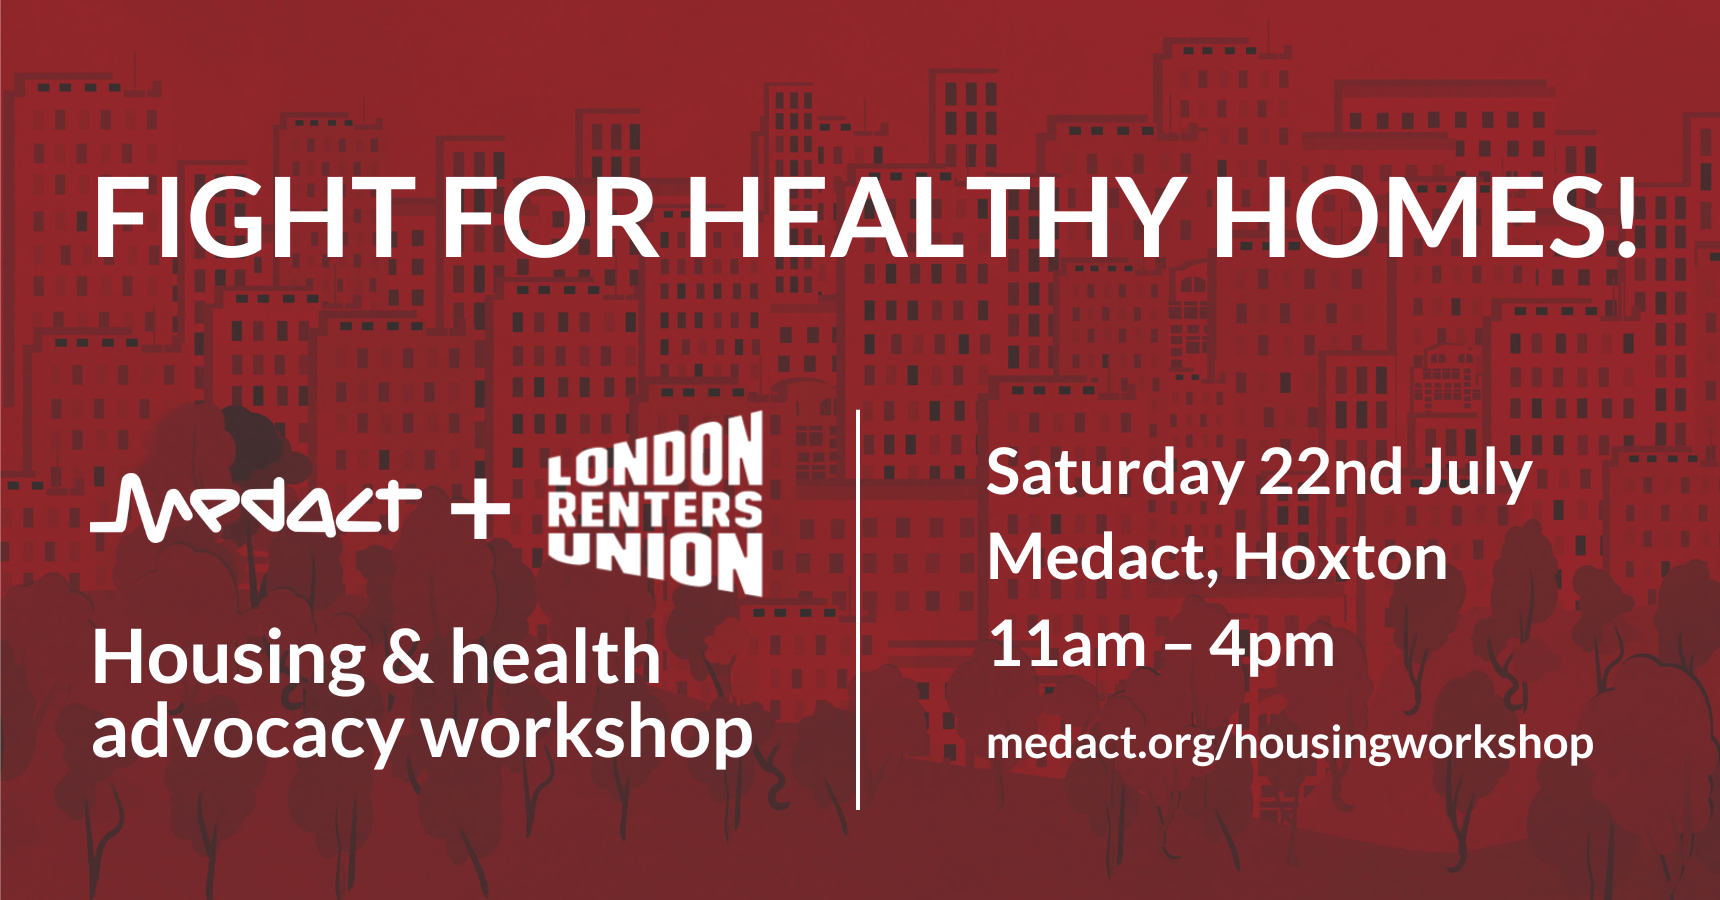 Fight for Healthy Homes! Medact & London Renters Union Housing & health advocacy workshop Saturday 22nd July Medact, Hoxton 11am – 4pm medact.org/housingworkshop